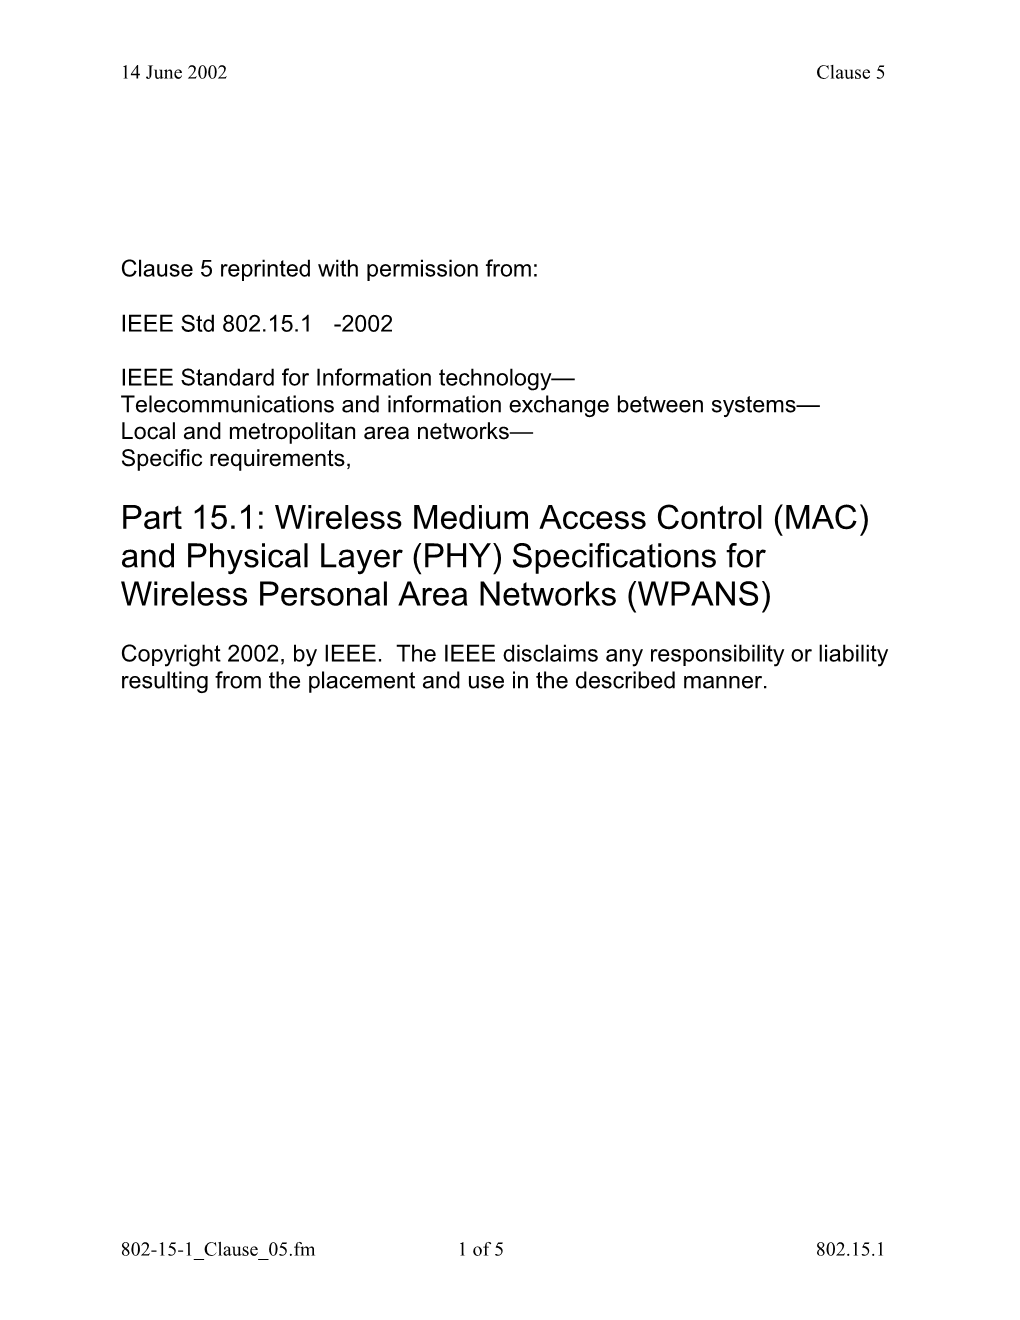 Part 15.1: Wireless Medium Access Control (MAC) and Physical Layer (PHY) Specifications for Wireless Personal Area Networks (WPANS)